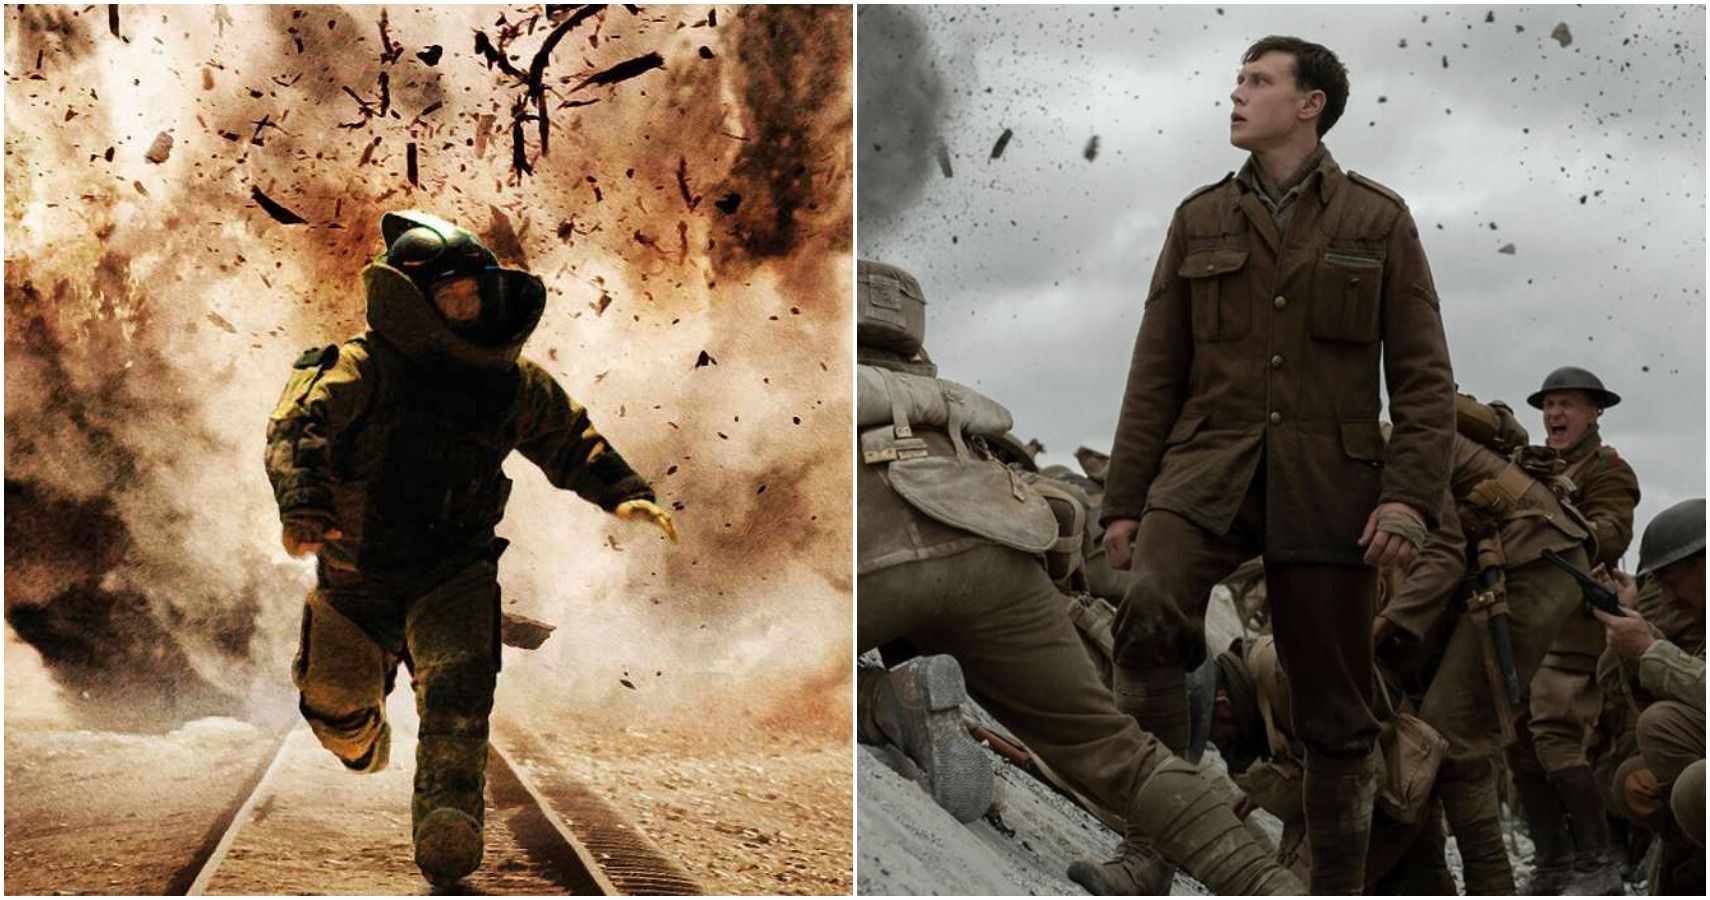 10 Of The Best War Movies Of All Time Ranked According To Rotten Tomatoes